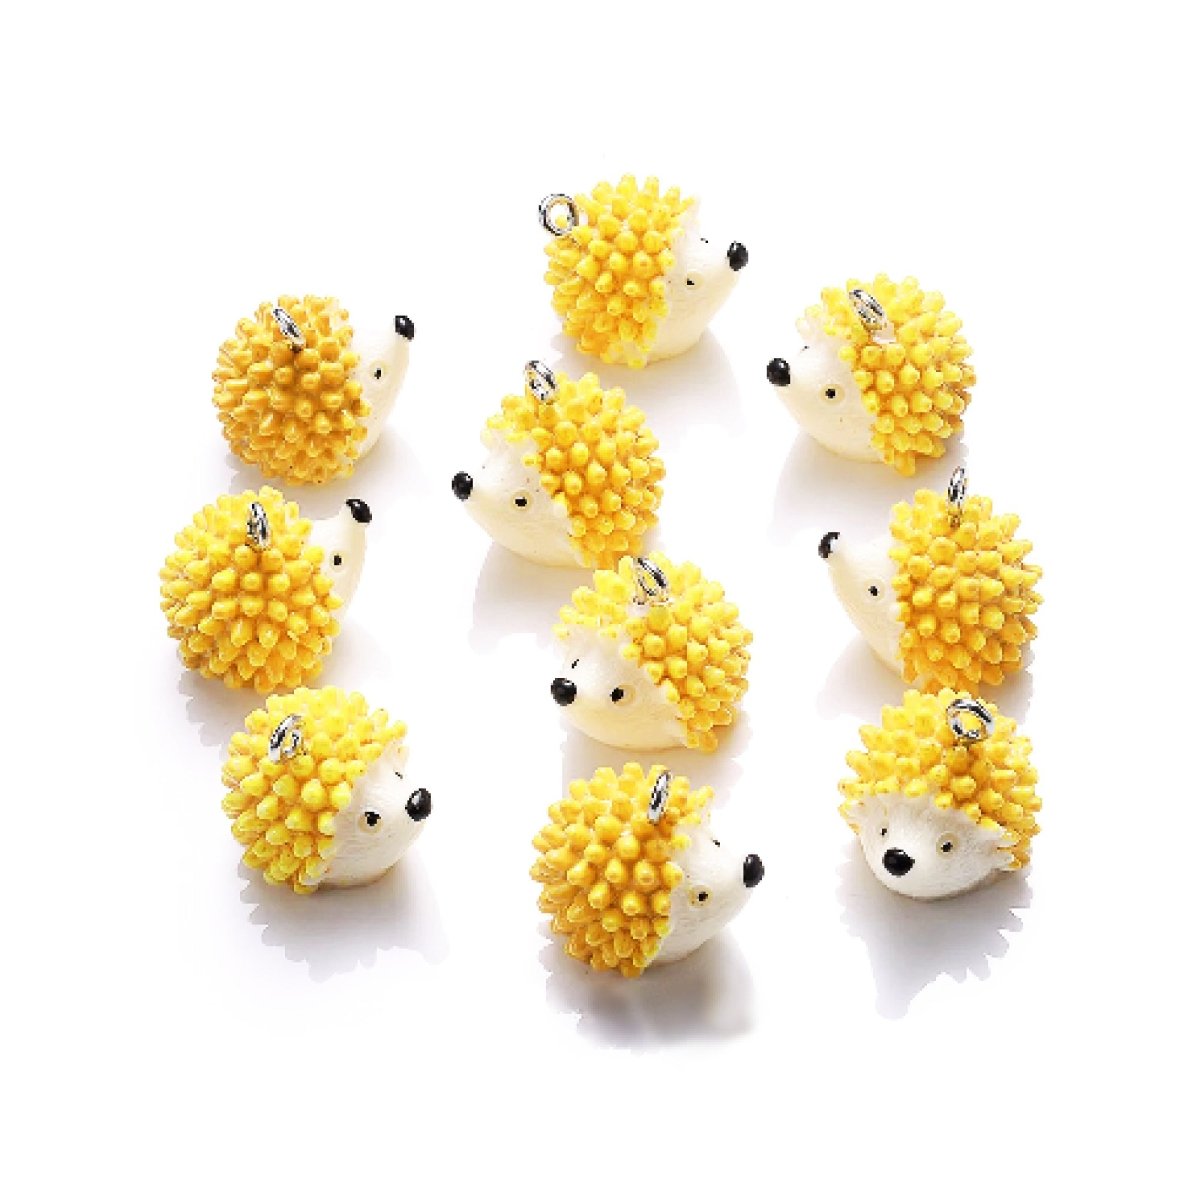 10pcs Miniature Mini Garden Animal Figurines Charms with Loop Pendant Craft - Echidna - Asia Sell